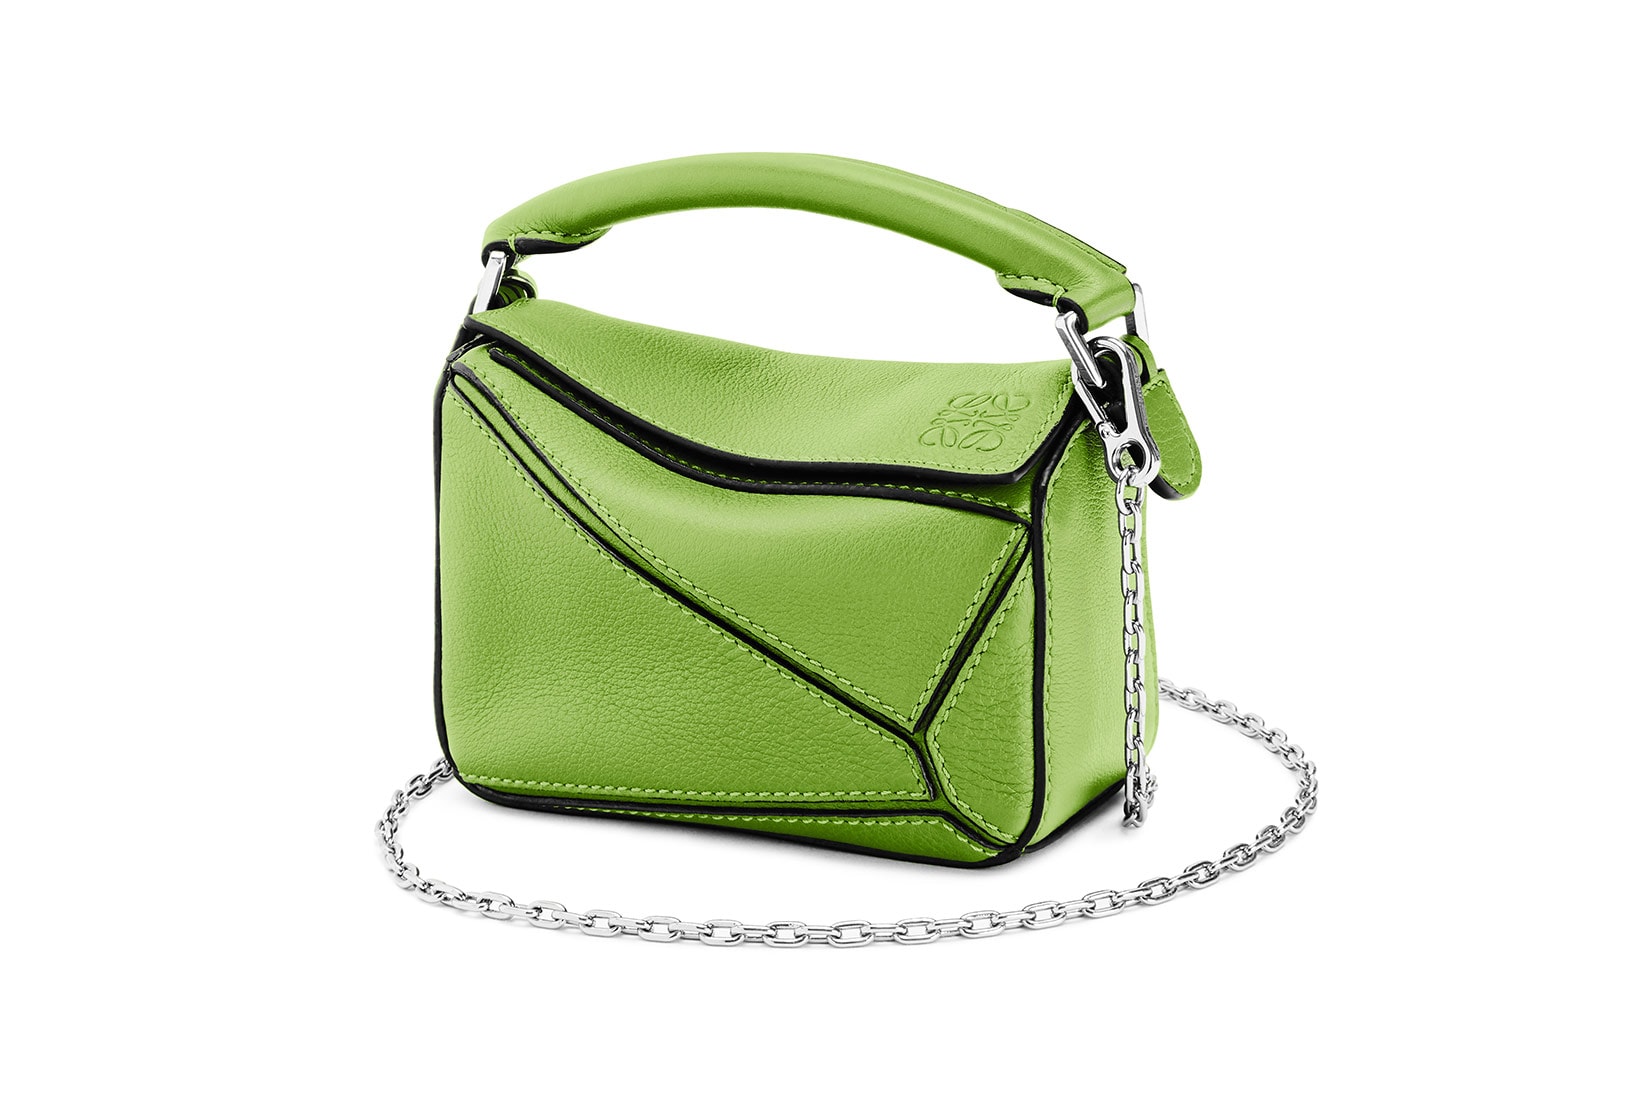 LOEWE Puzzle Handbag Collection Jonathan Anderson Lime Green Accessories Designer Bags